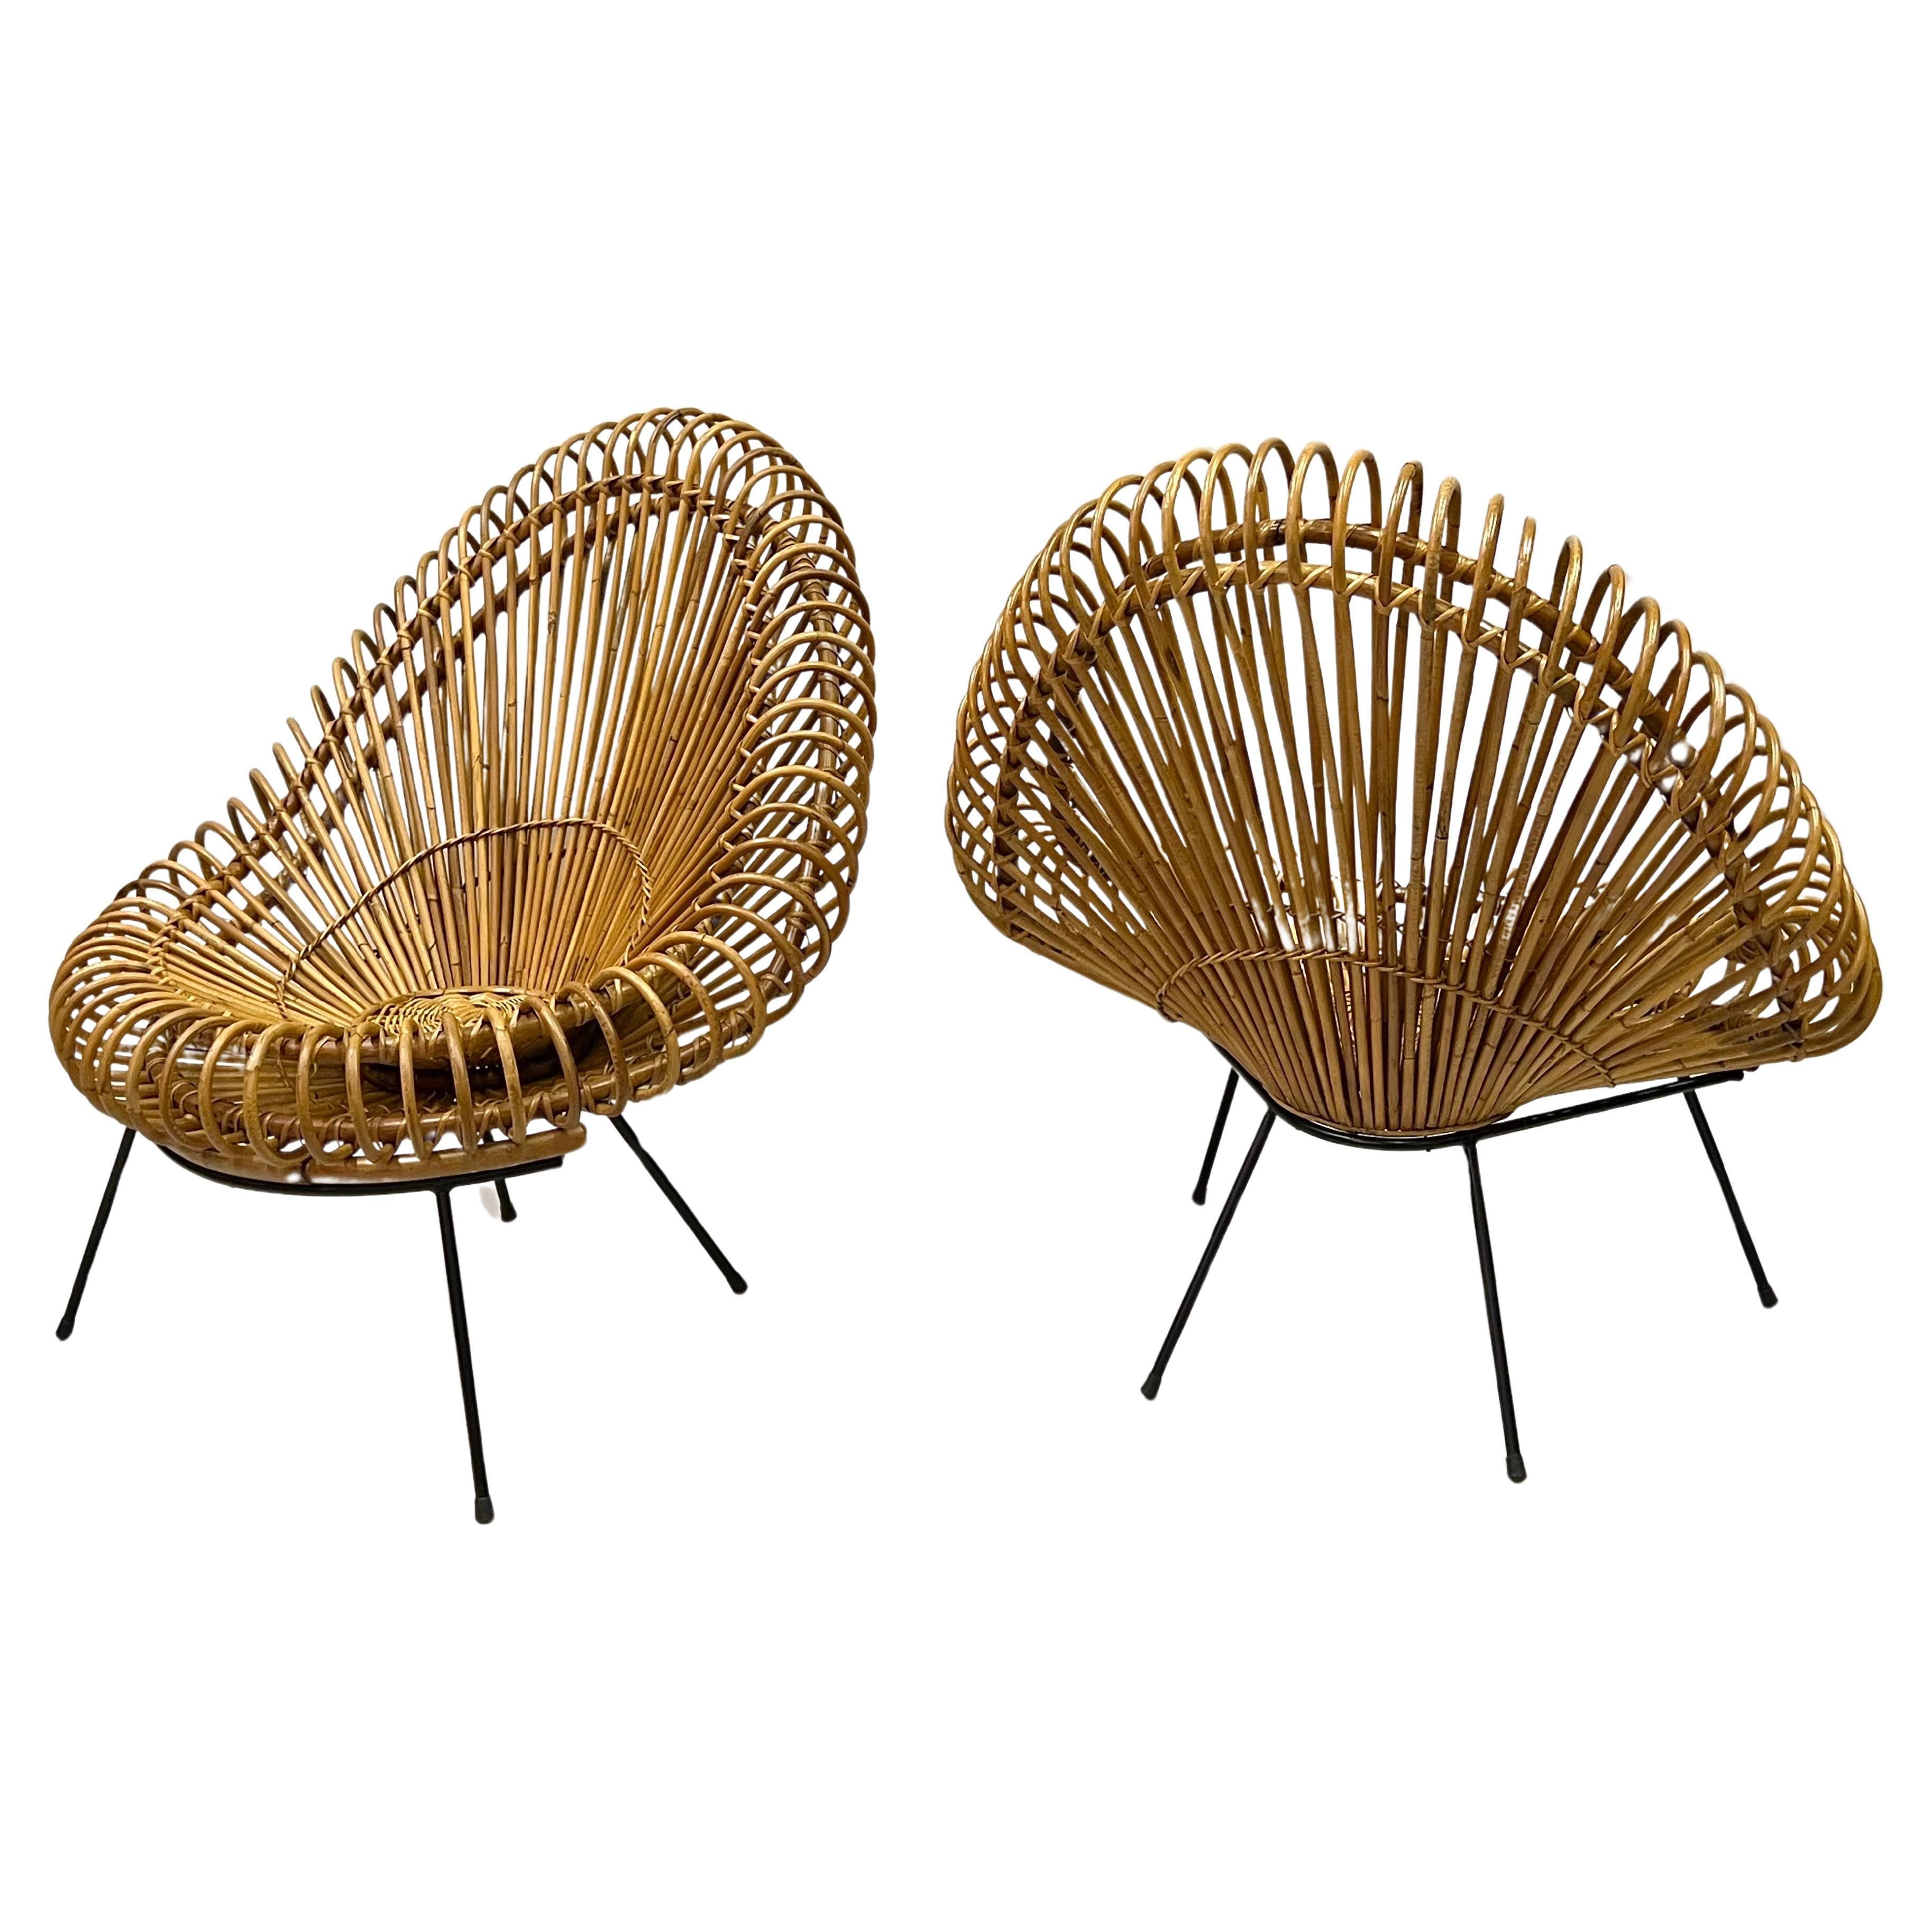 Pair of Large French Rattan Lounge Chairs by Janine Abraham & Dirk Jan Roi For Sale